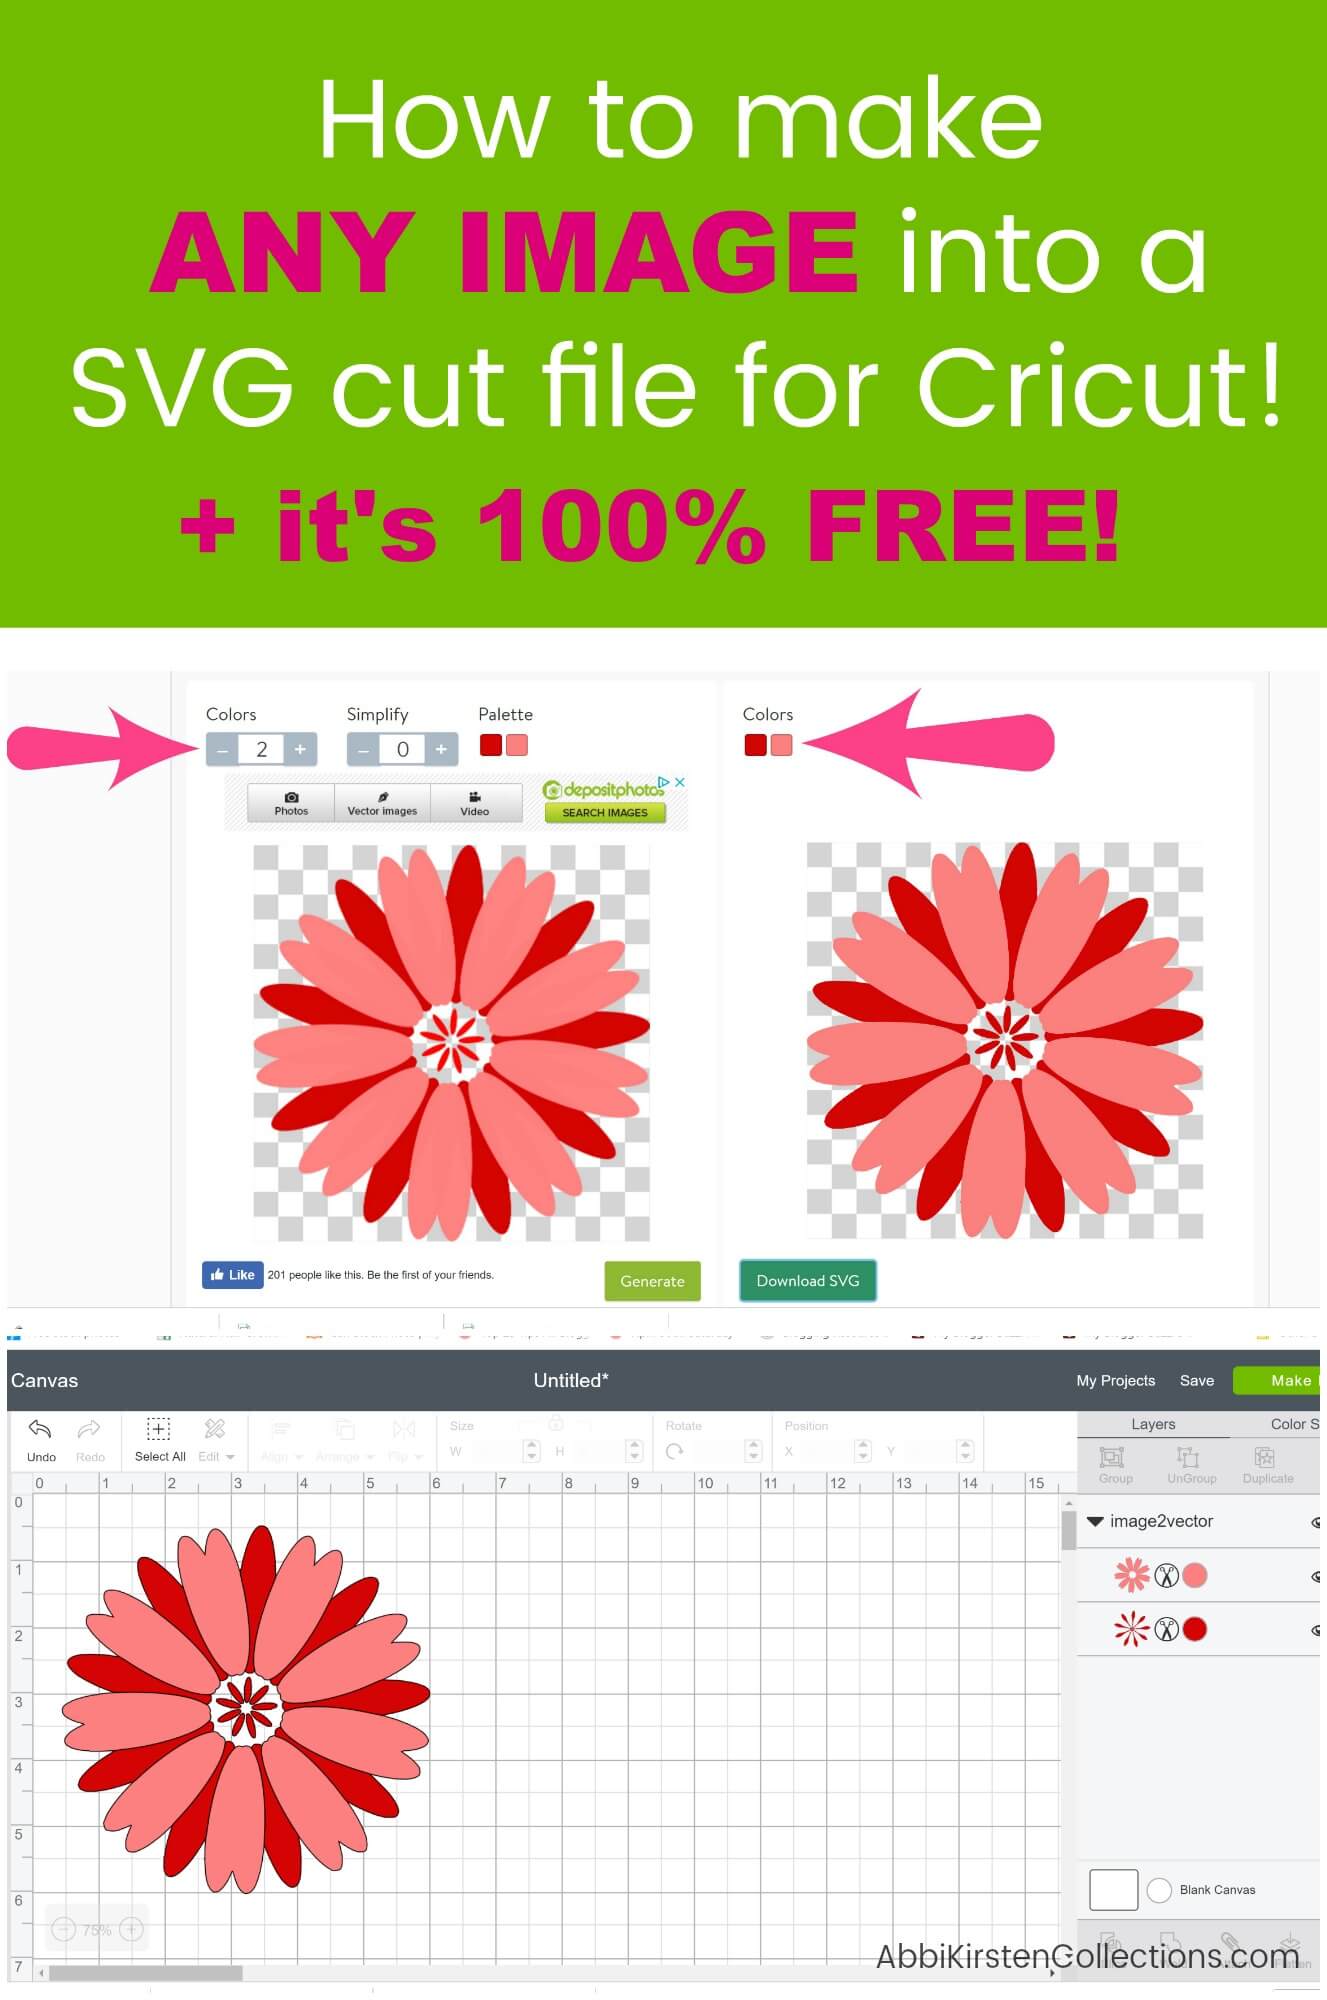 Convert an Image to SVG to use in Cricut Design Space